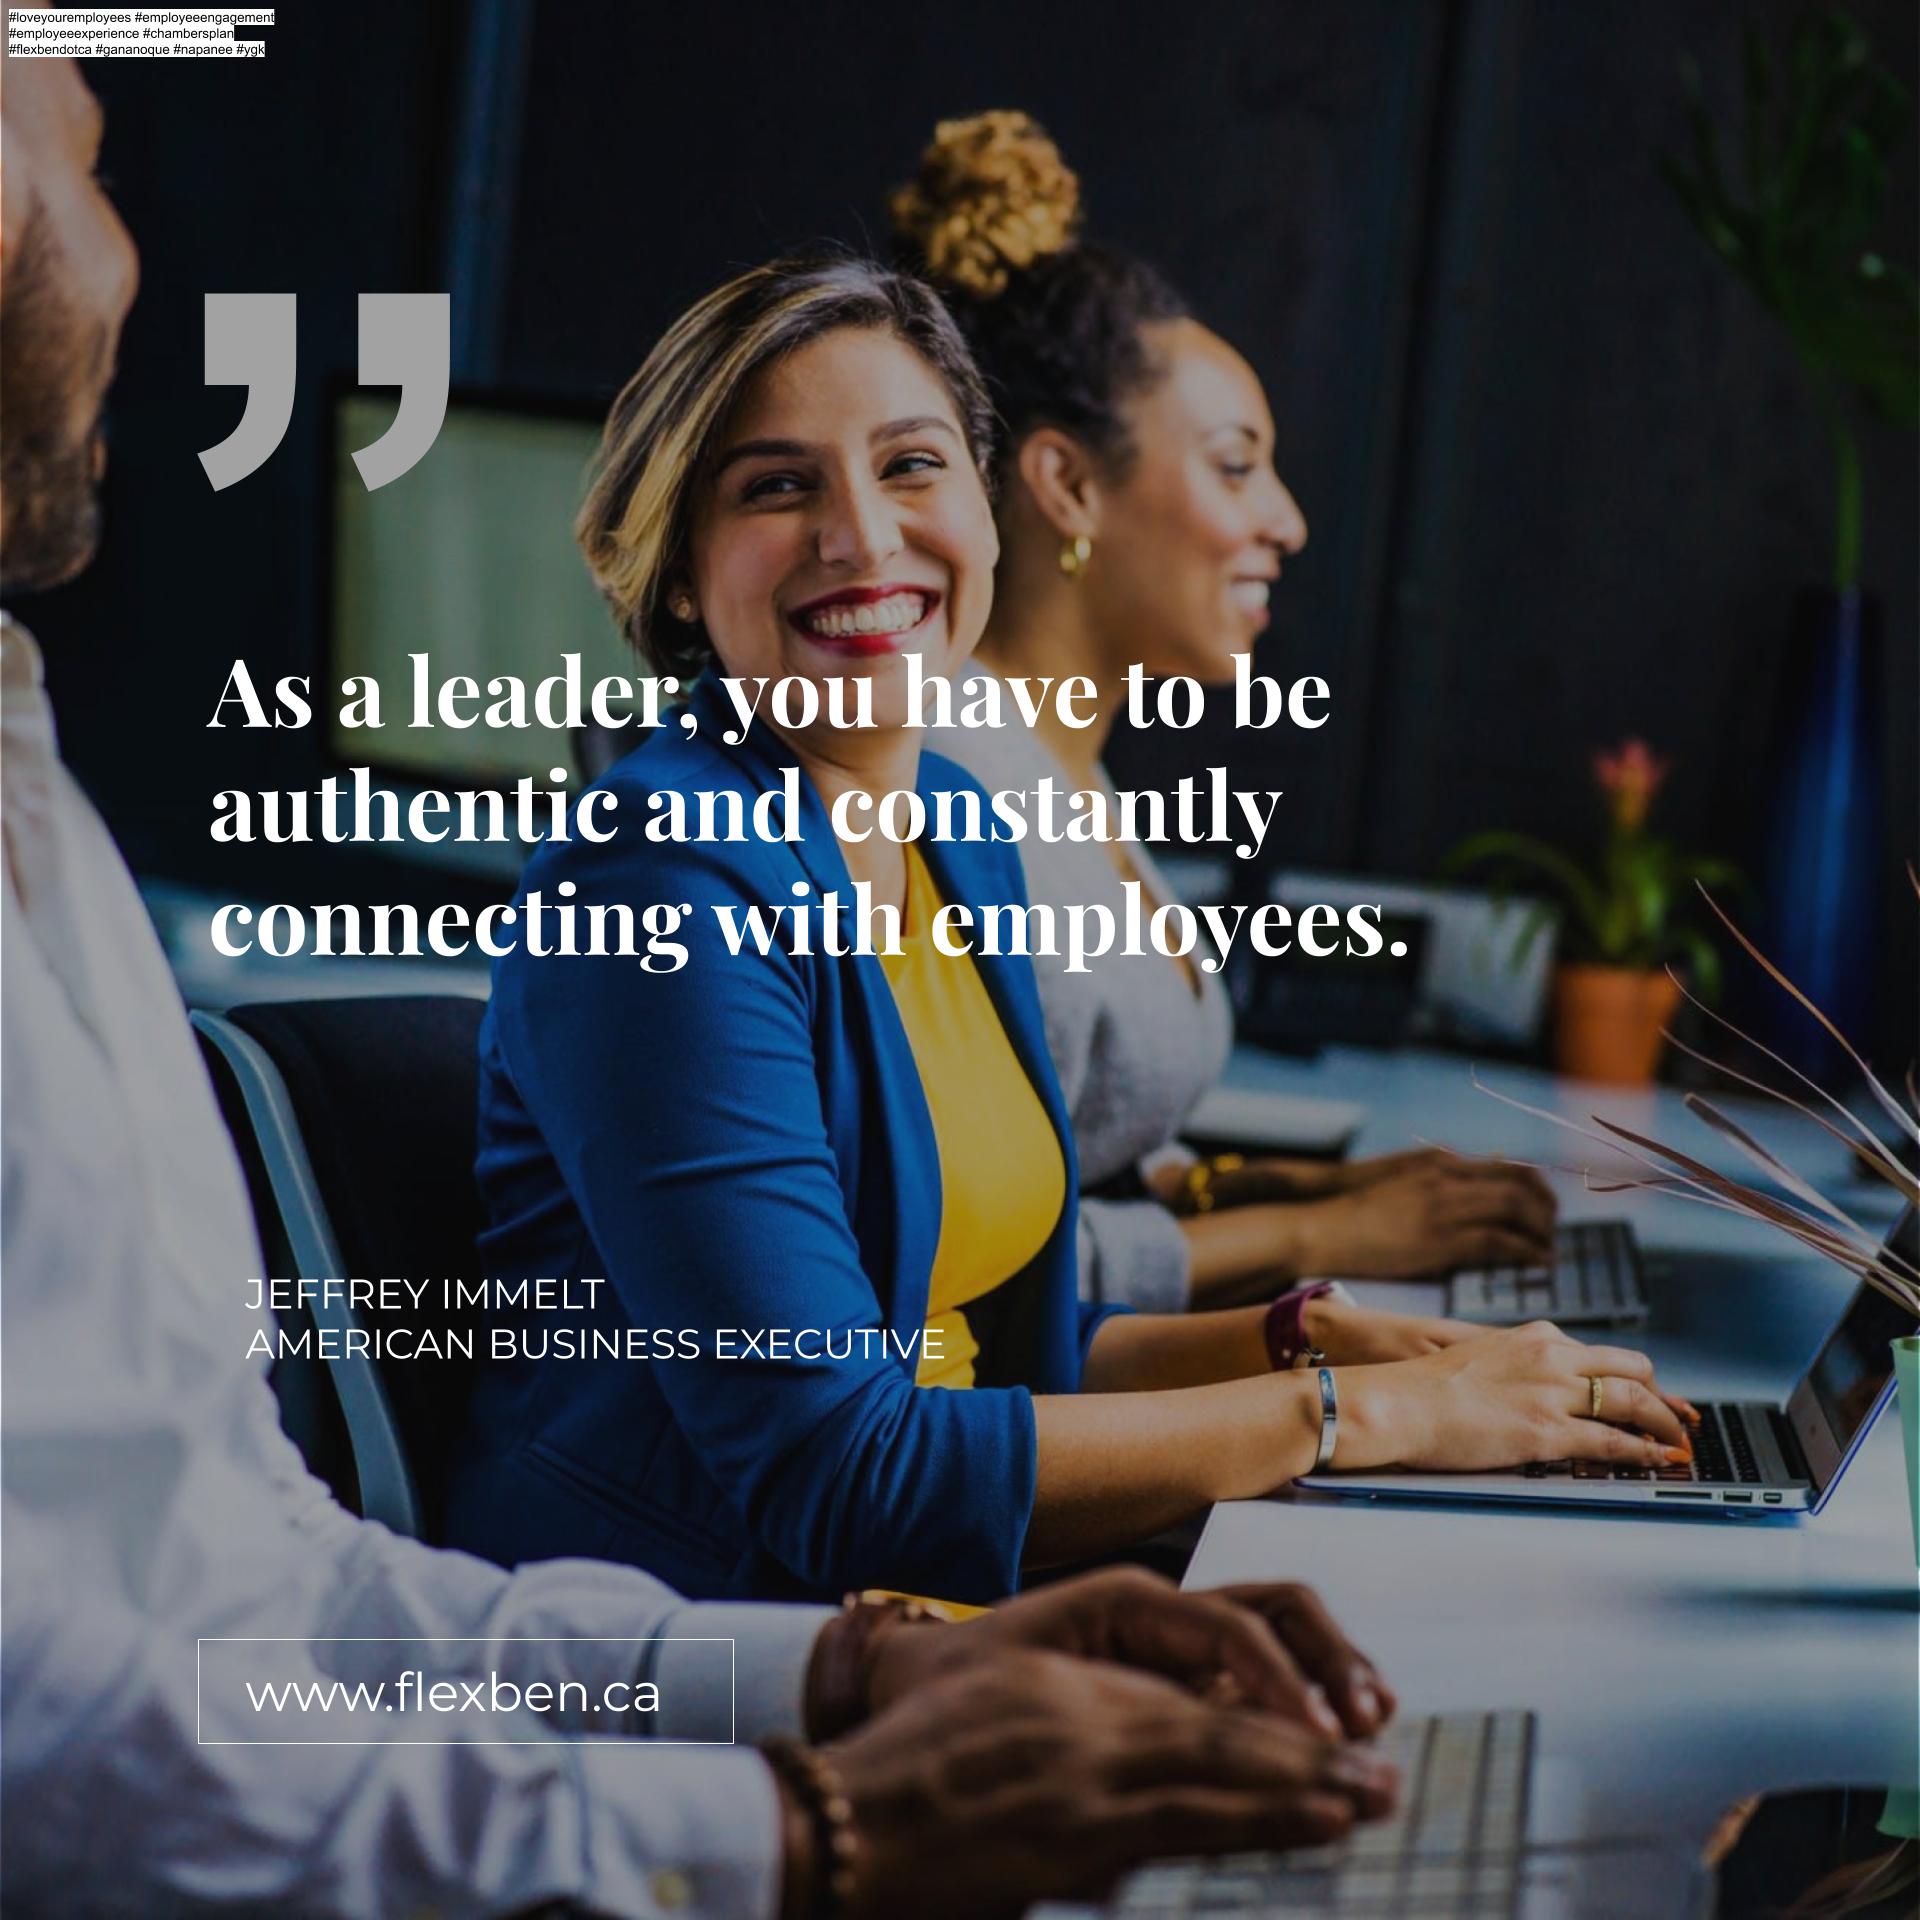 As A Leader, You Have To Be Authentic And Constantly Connecting with Employees